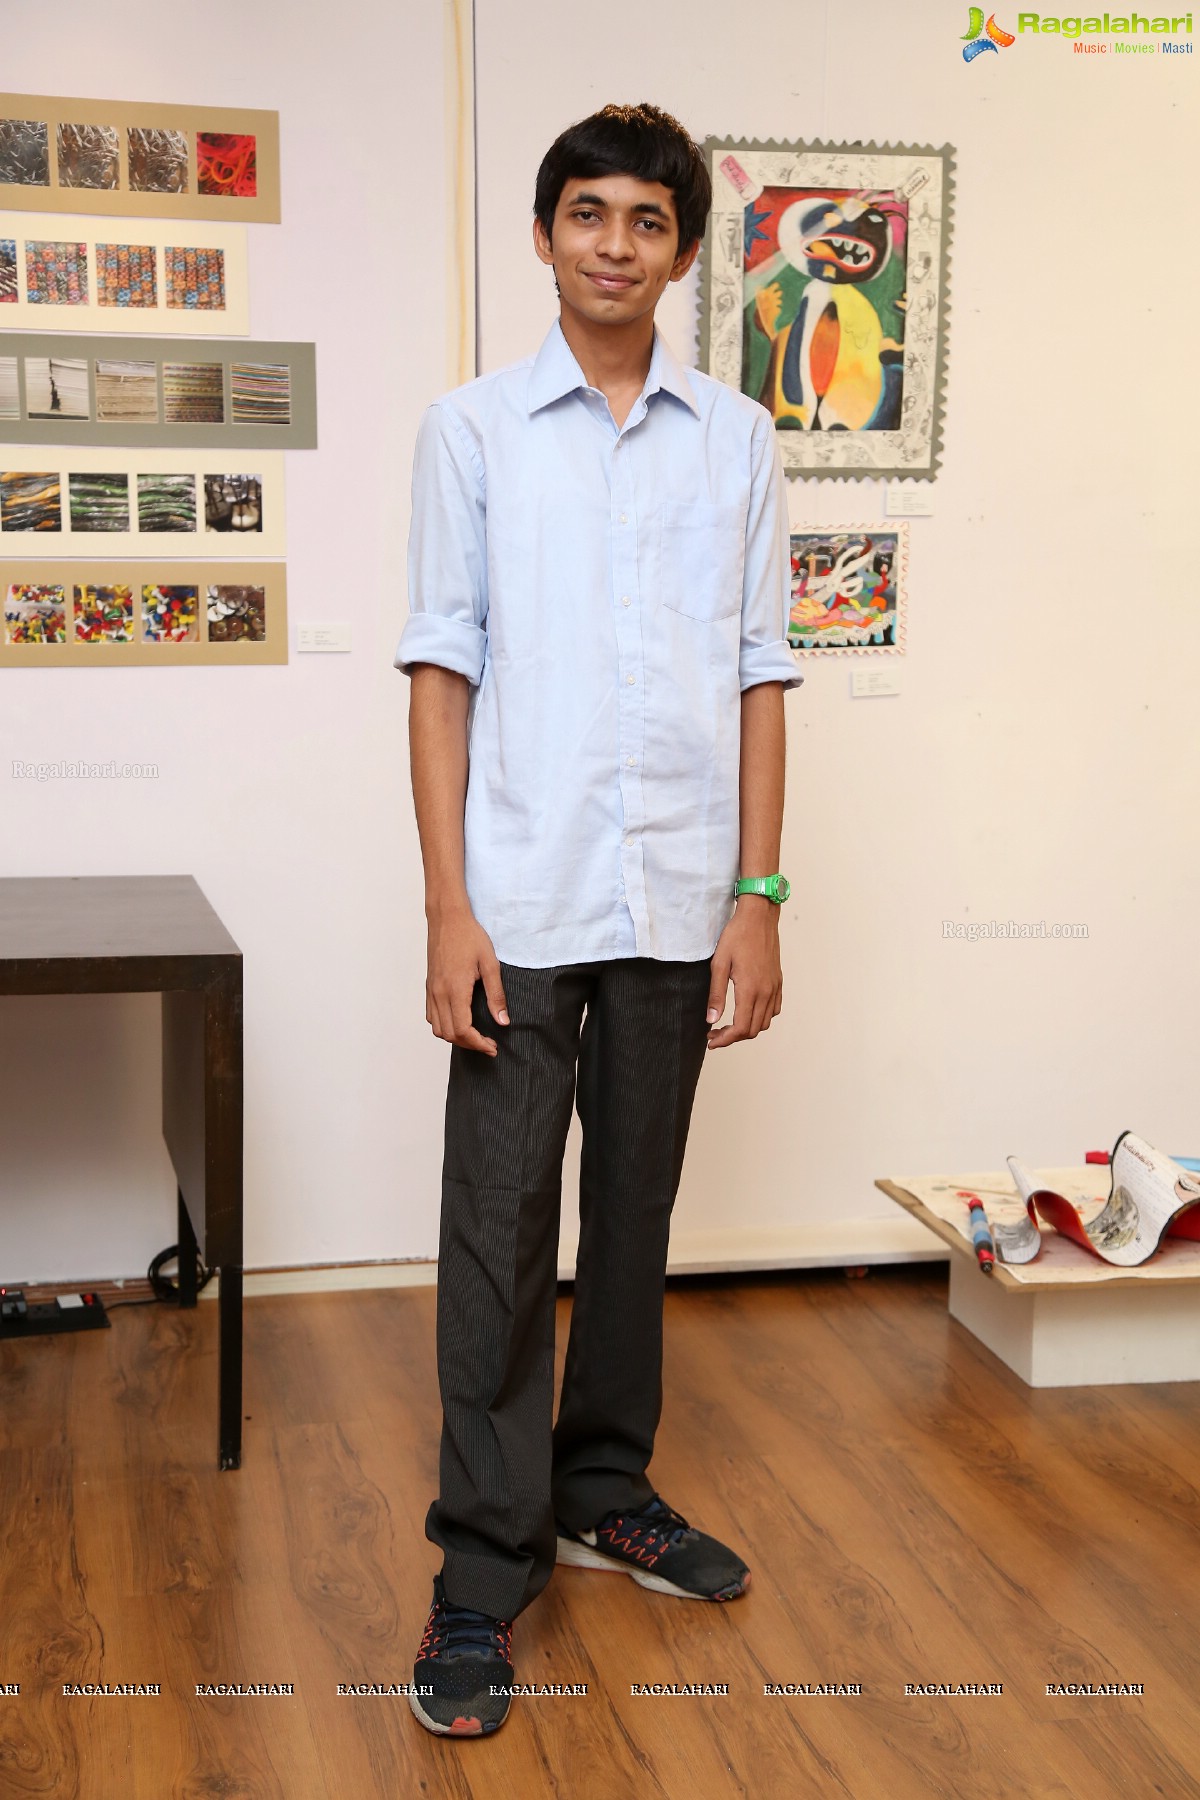 River of Wings - A Collective Imagination II - Art Exhibition at Kalakriti Art Gallery